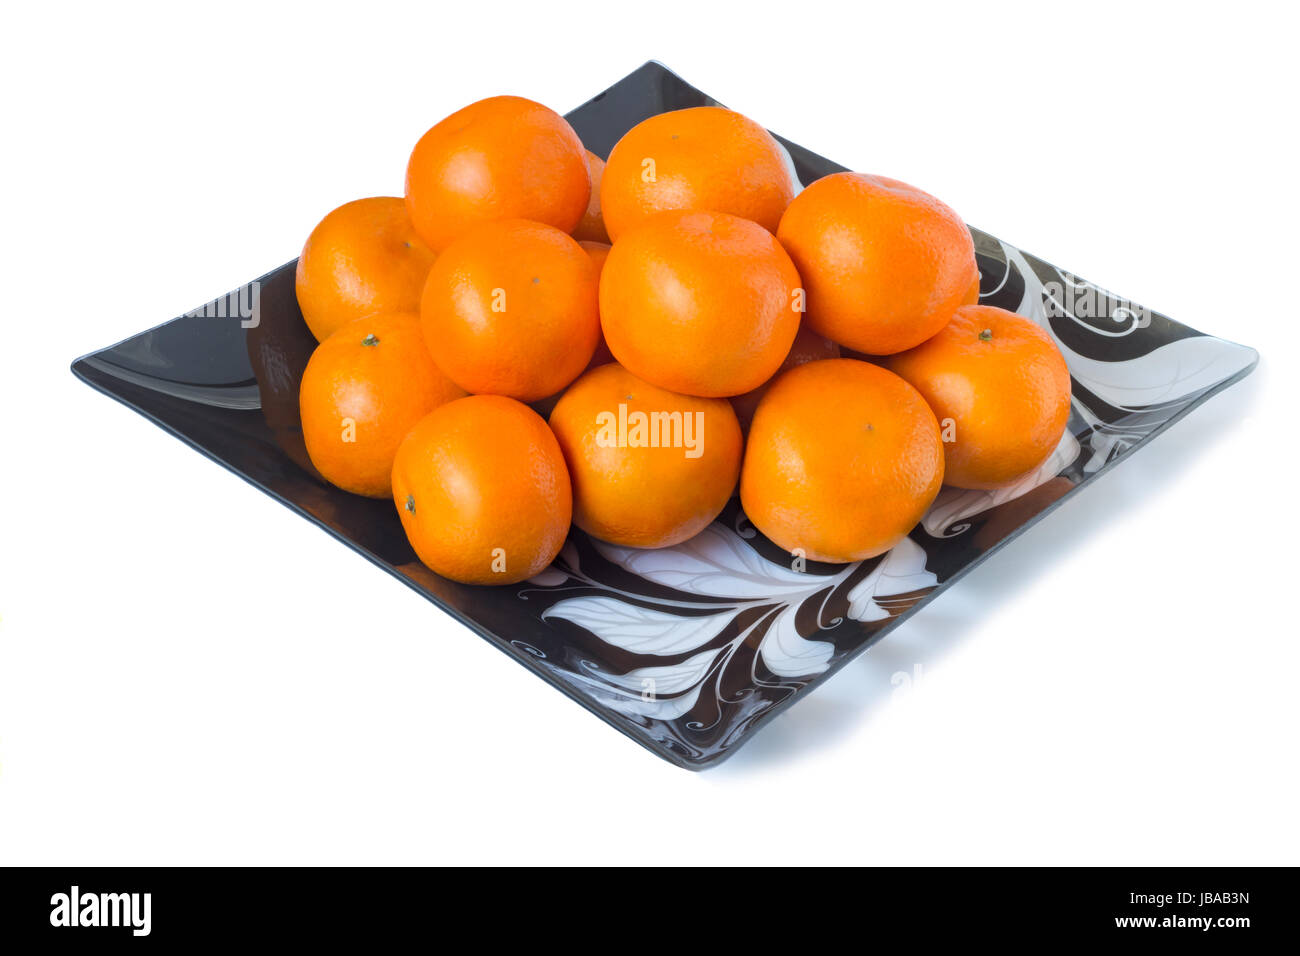 Large ripe oranges are located on a dish made of dark glass with ornament. Presented on a white background Stock Photo